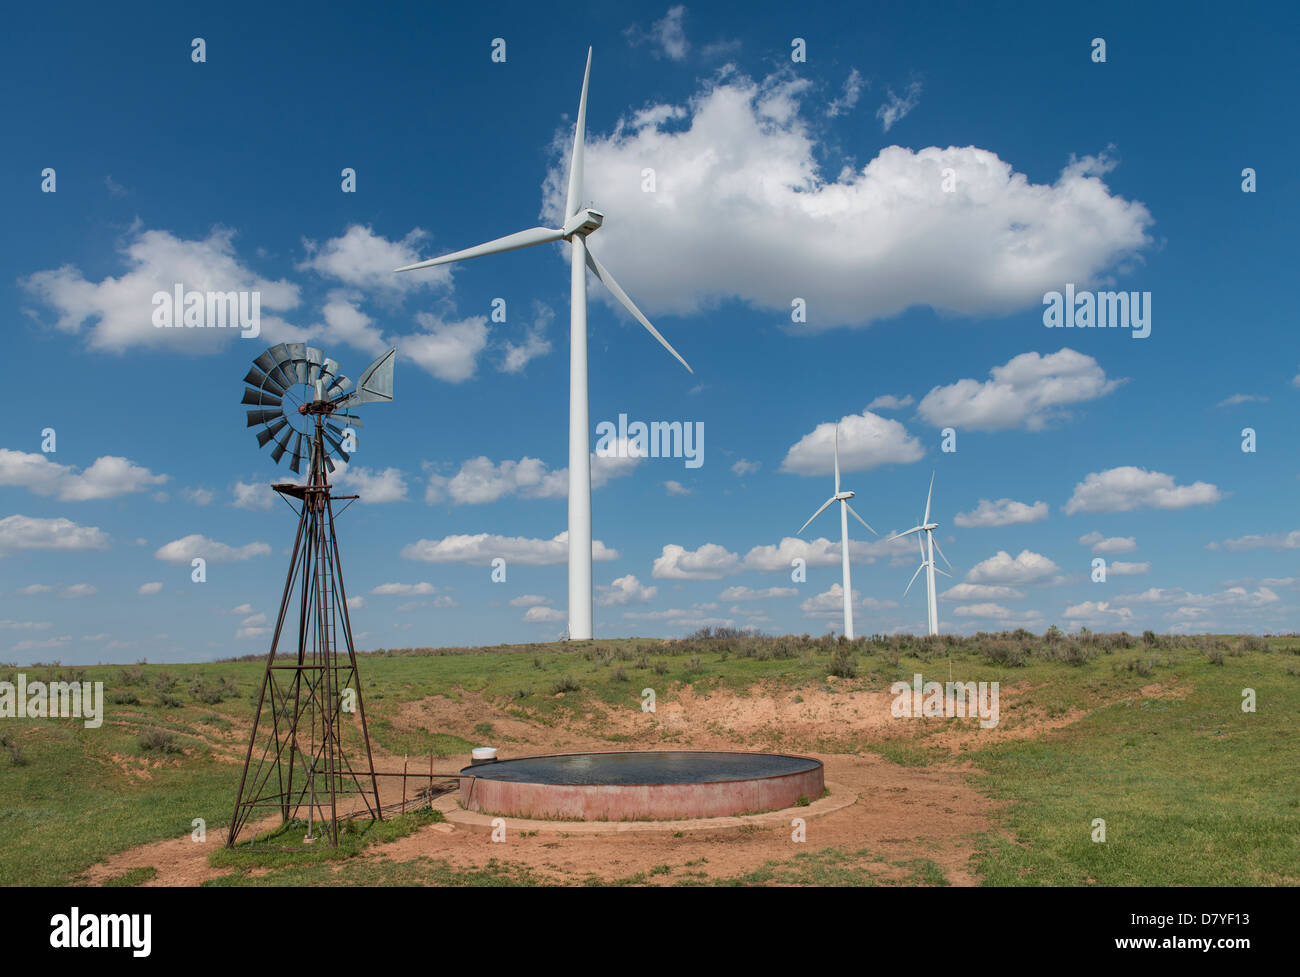 An old water pumping windmill sits beside electricity generating windmills in northwest Oklahoma Stock Photo